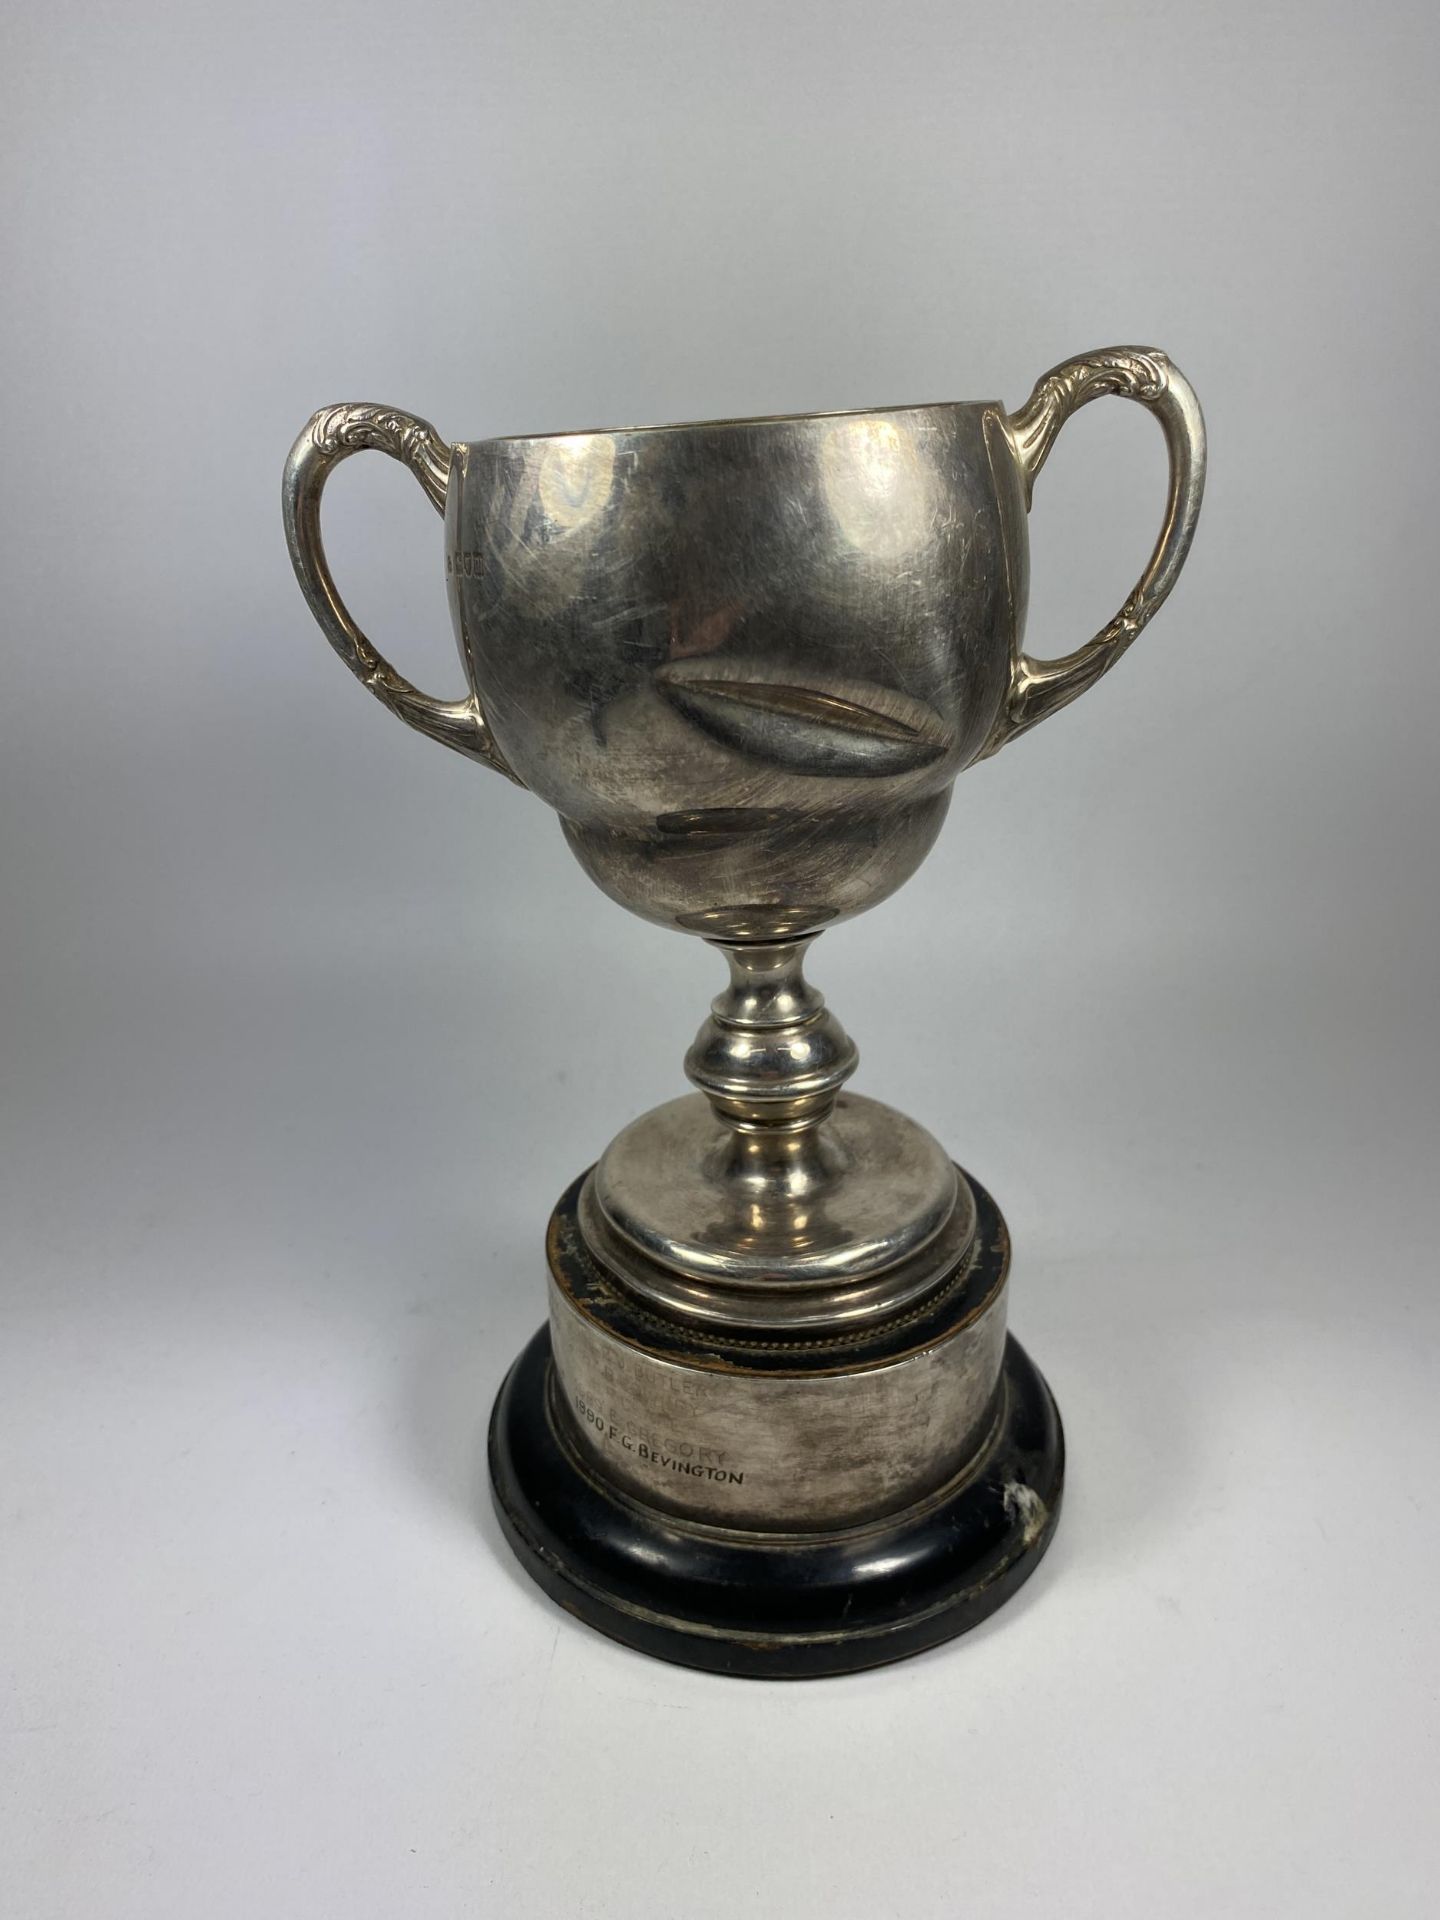 A GEORGE V SILVER TROPHY CUP, HALLMARKS FOR WAKELY & WHEELER, LONDON, 1927, INSCRIBED BRITISH - Image 4 of 5